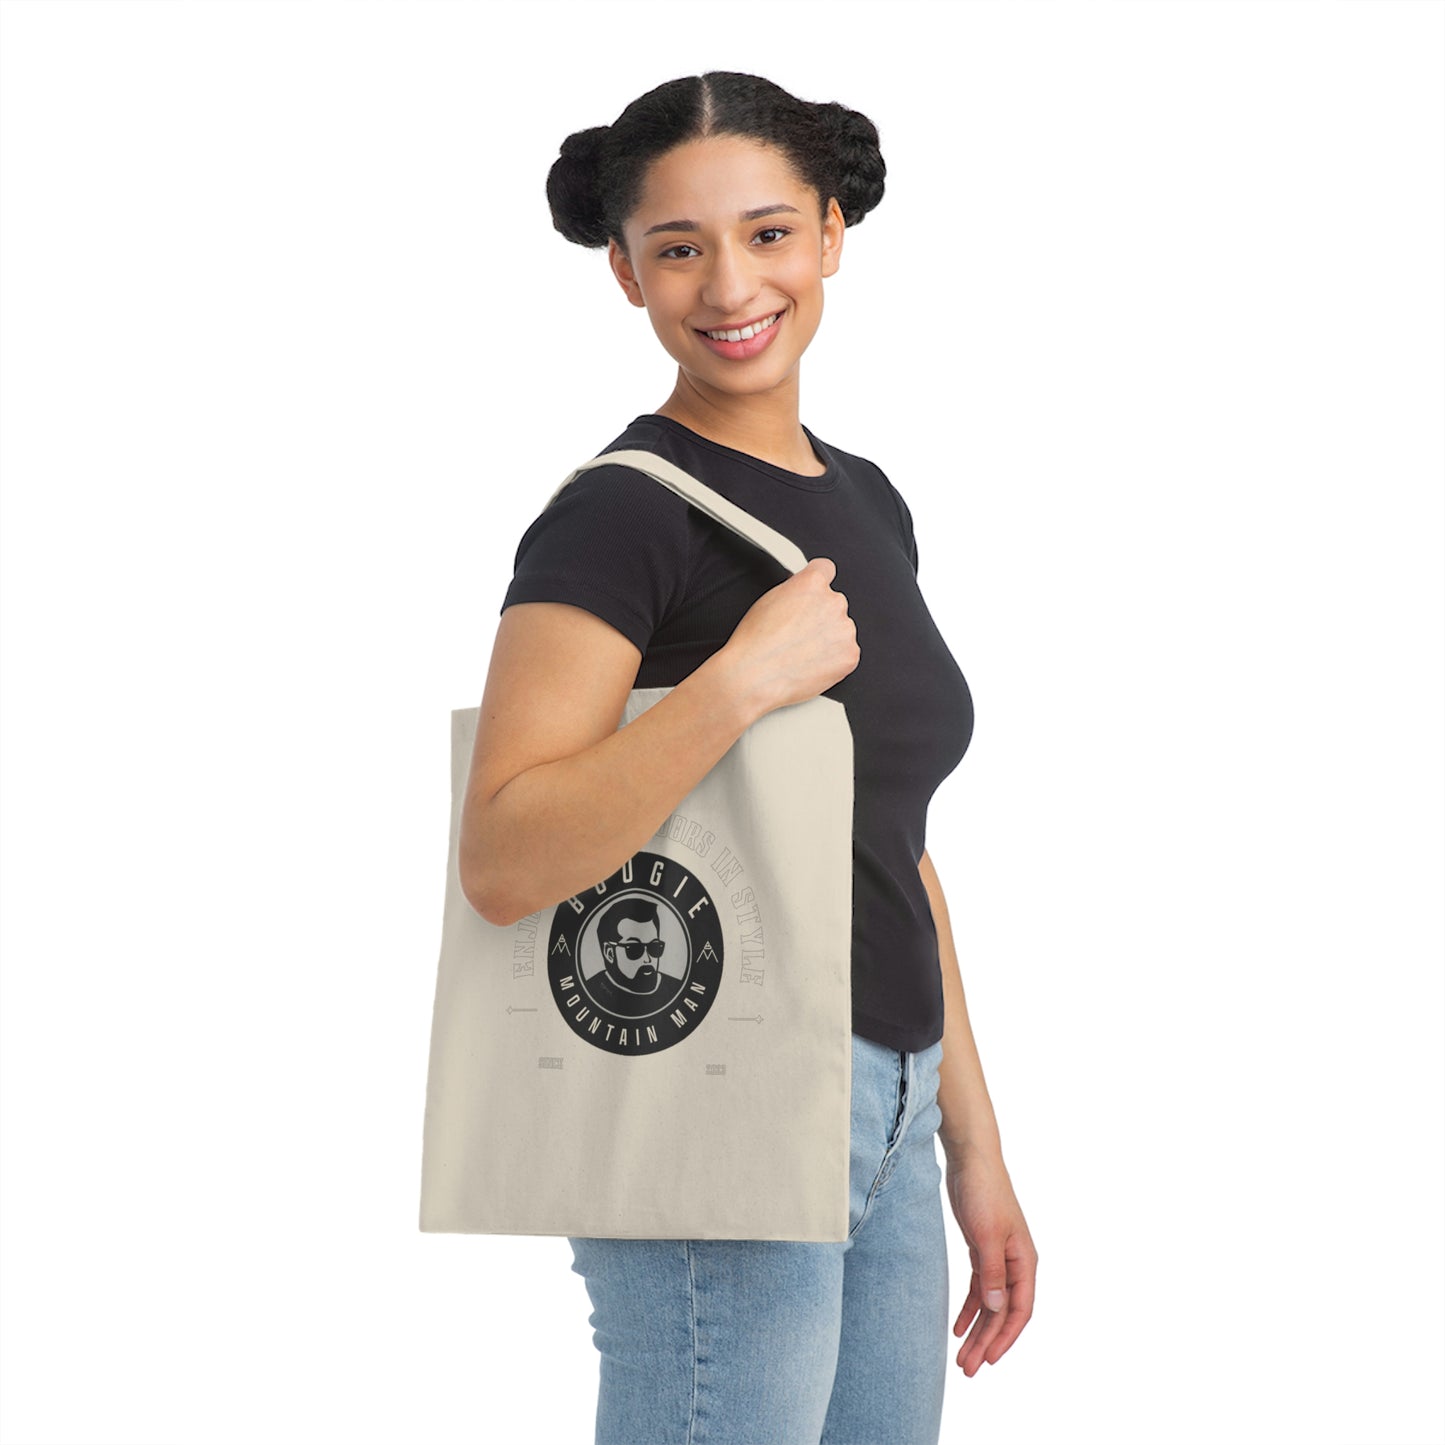 Enjoy The Outdoors In Style Tote Bag